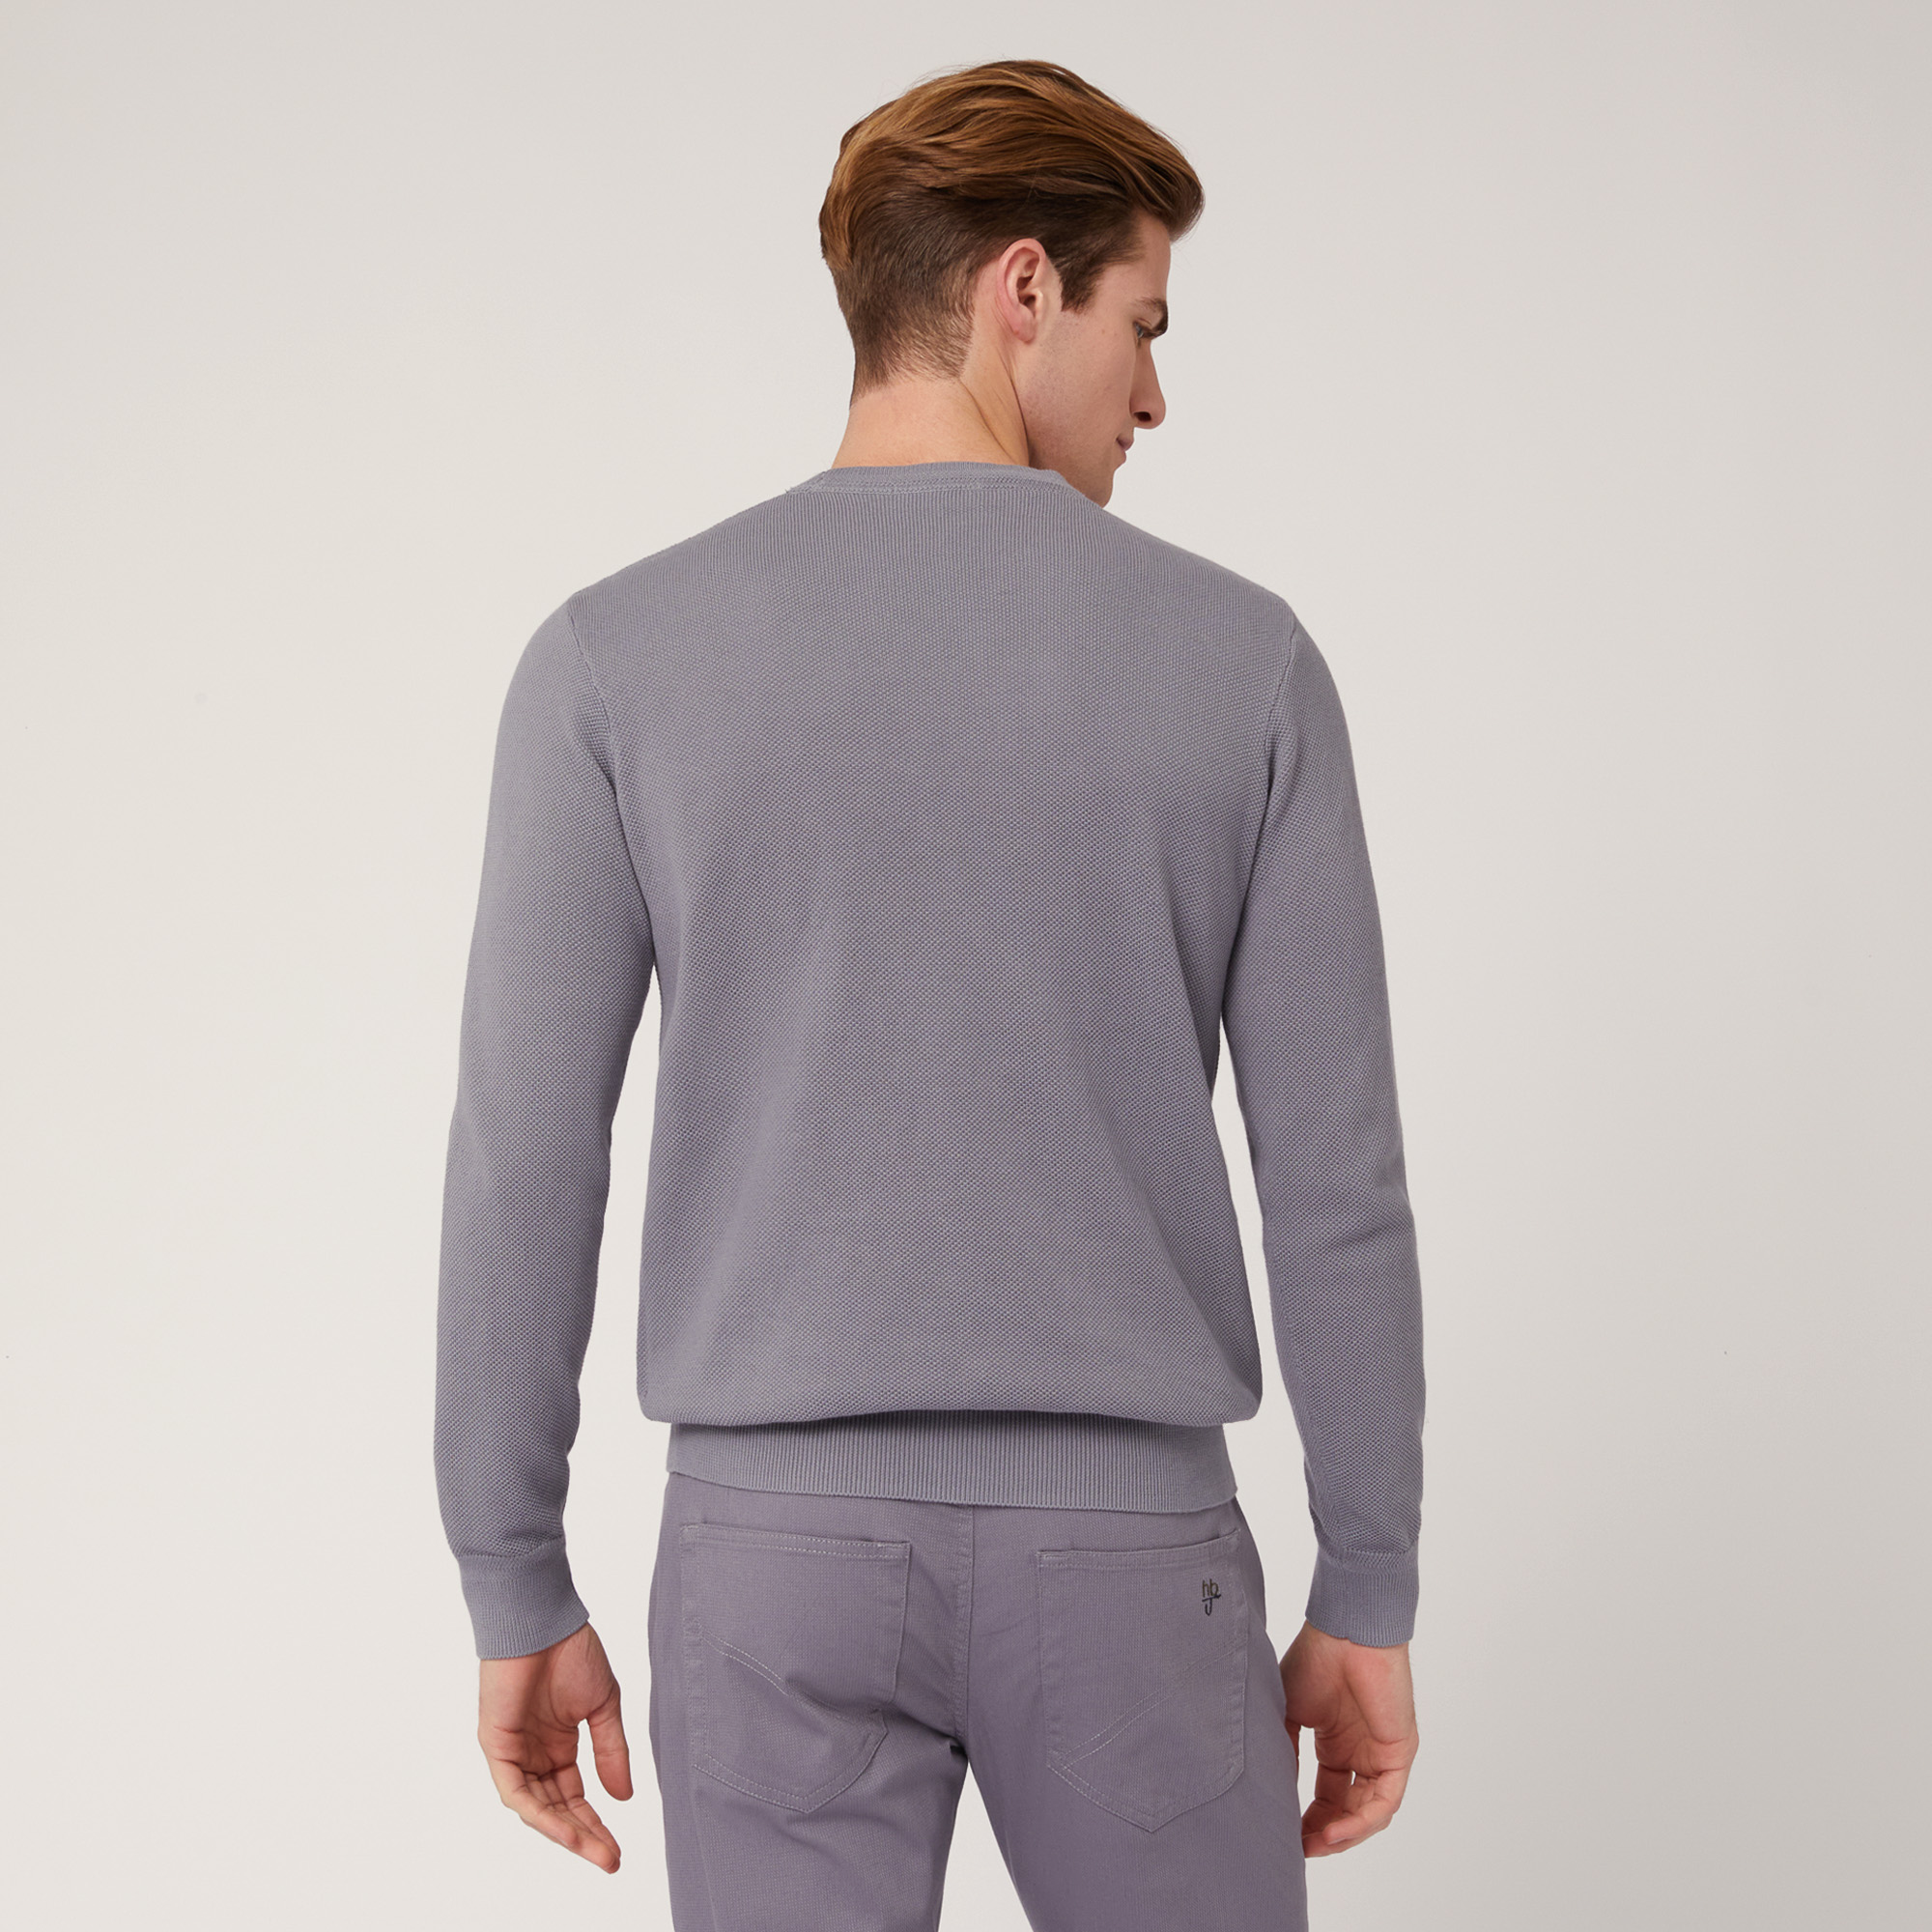 Pullover Girocollo Texture 3D, Grigio, large image number 1